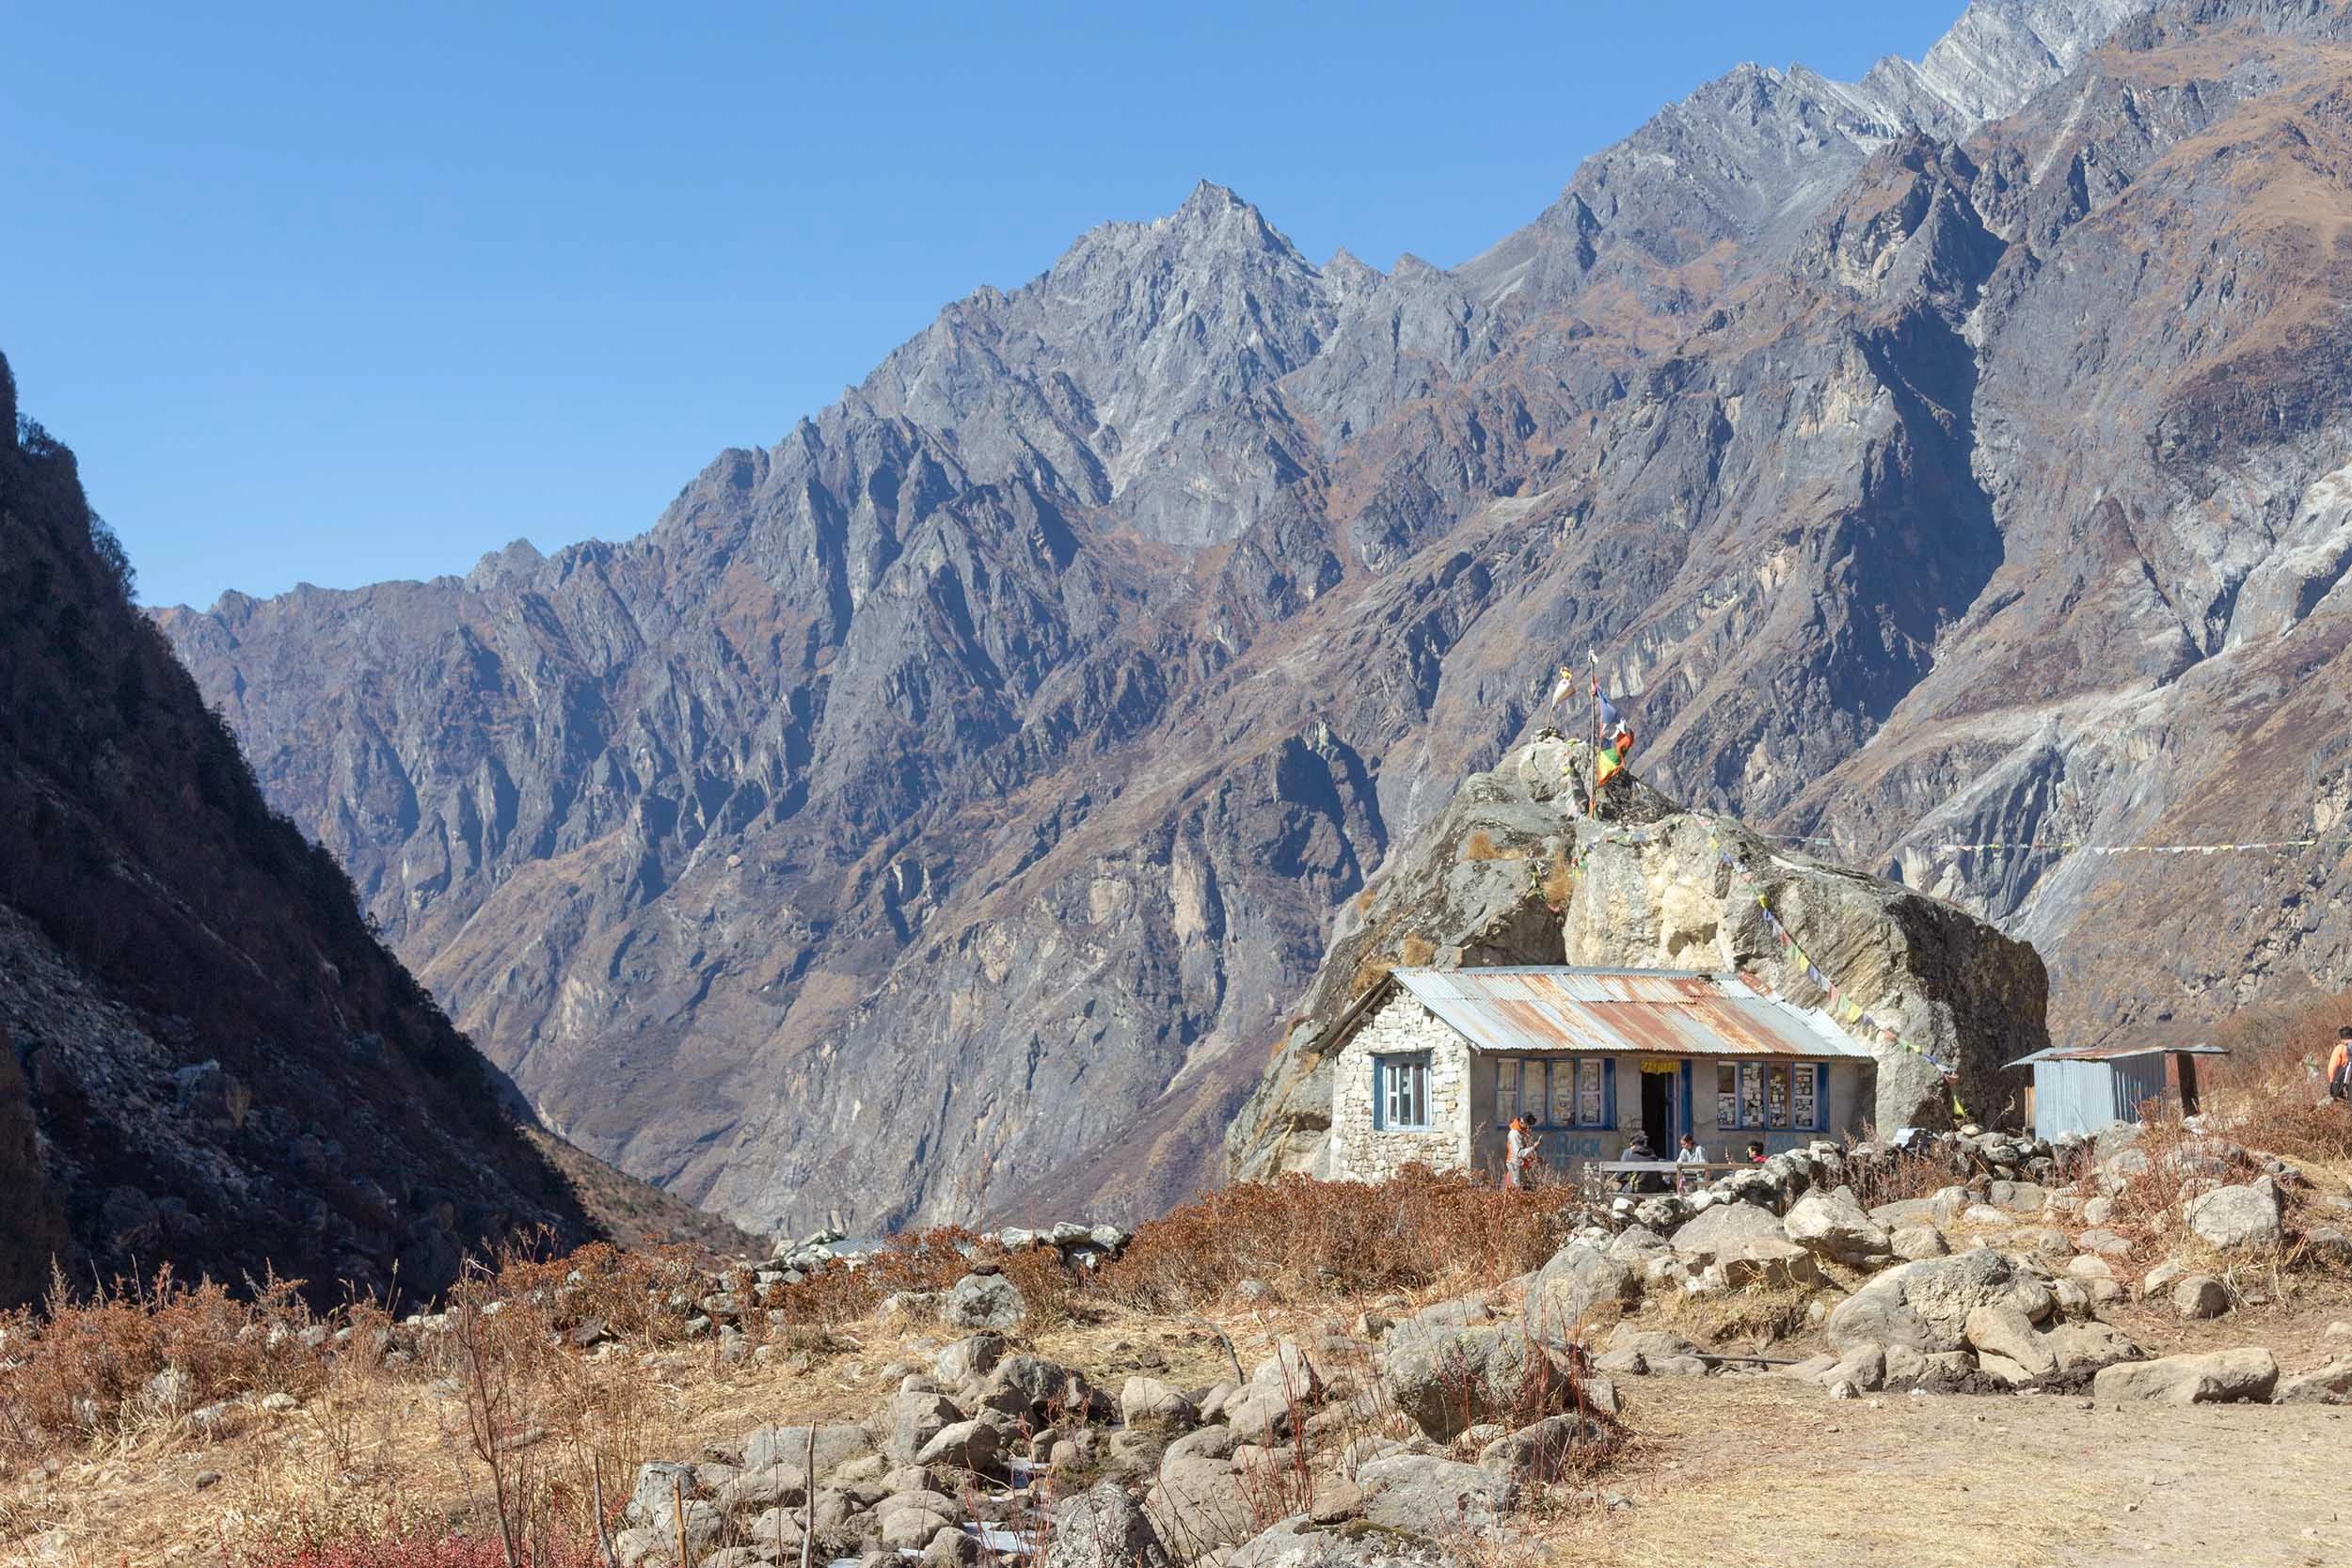 View of the Langtang Valley (Nepal) surrounded by mountains. In the front there is a small traditional house